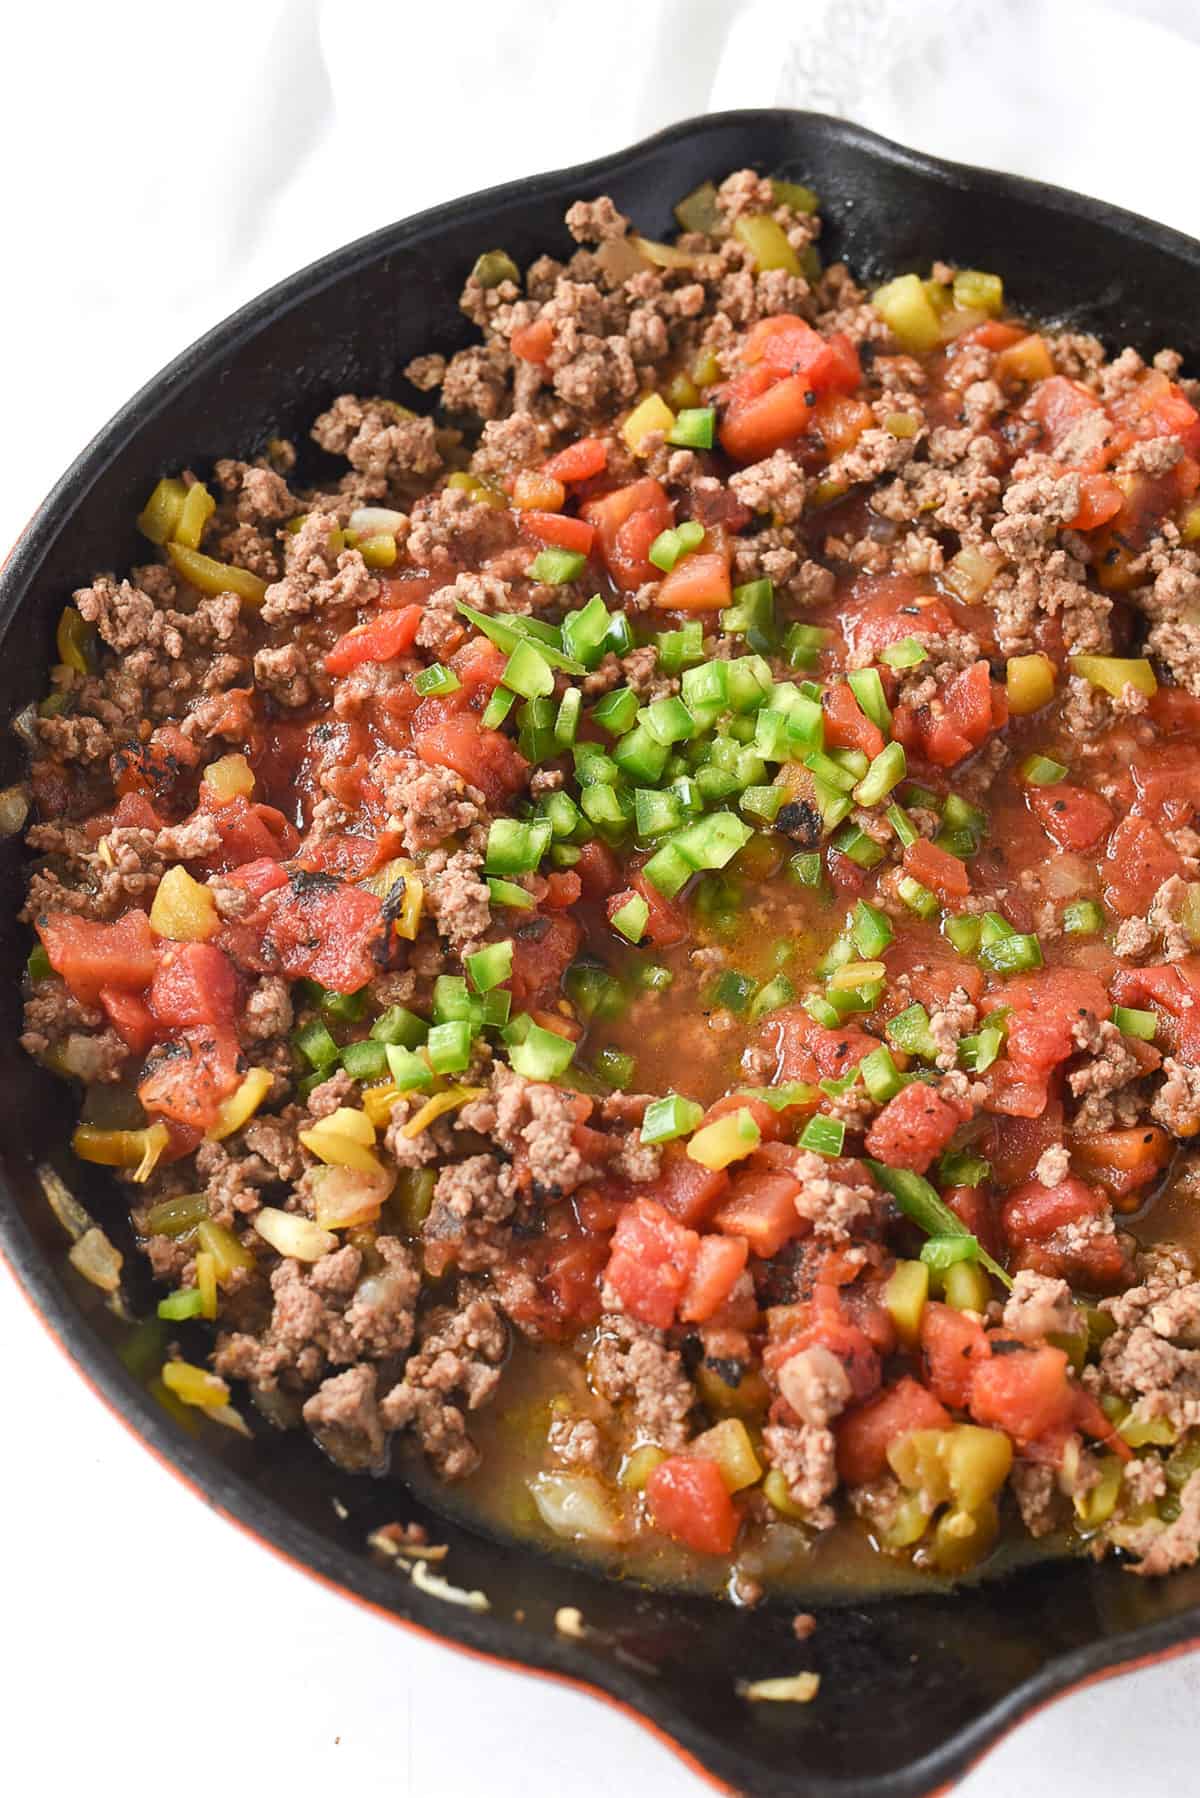 meat mixture for chili con queso dip